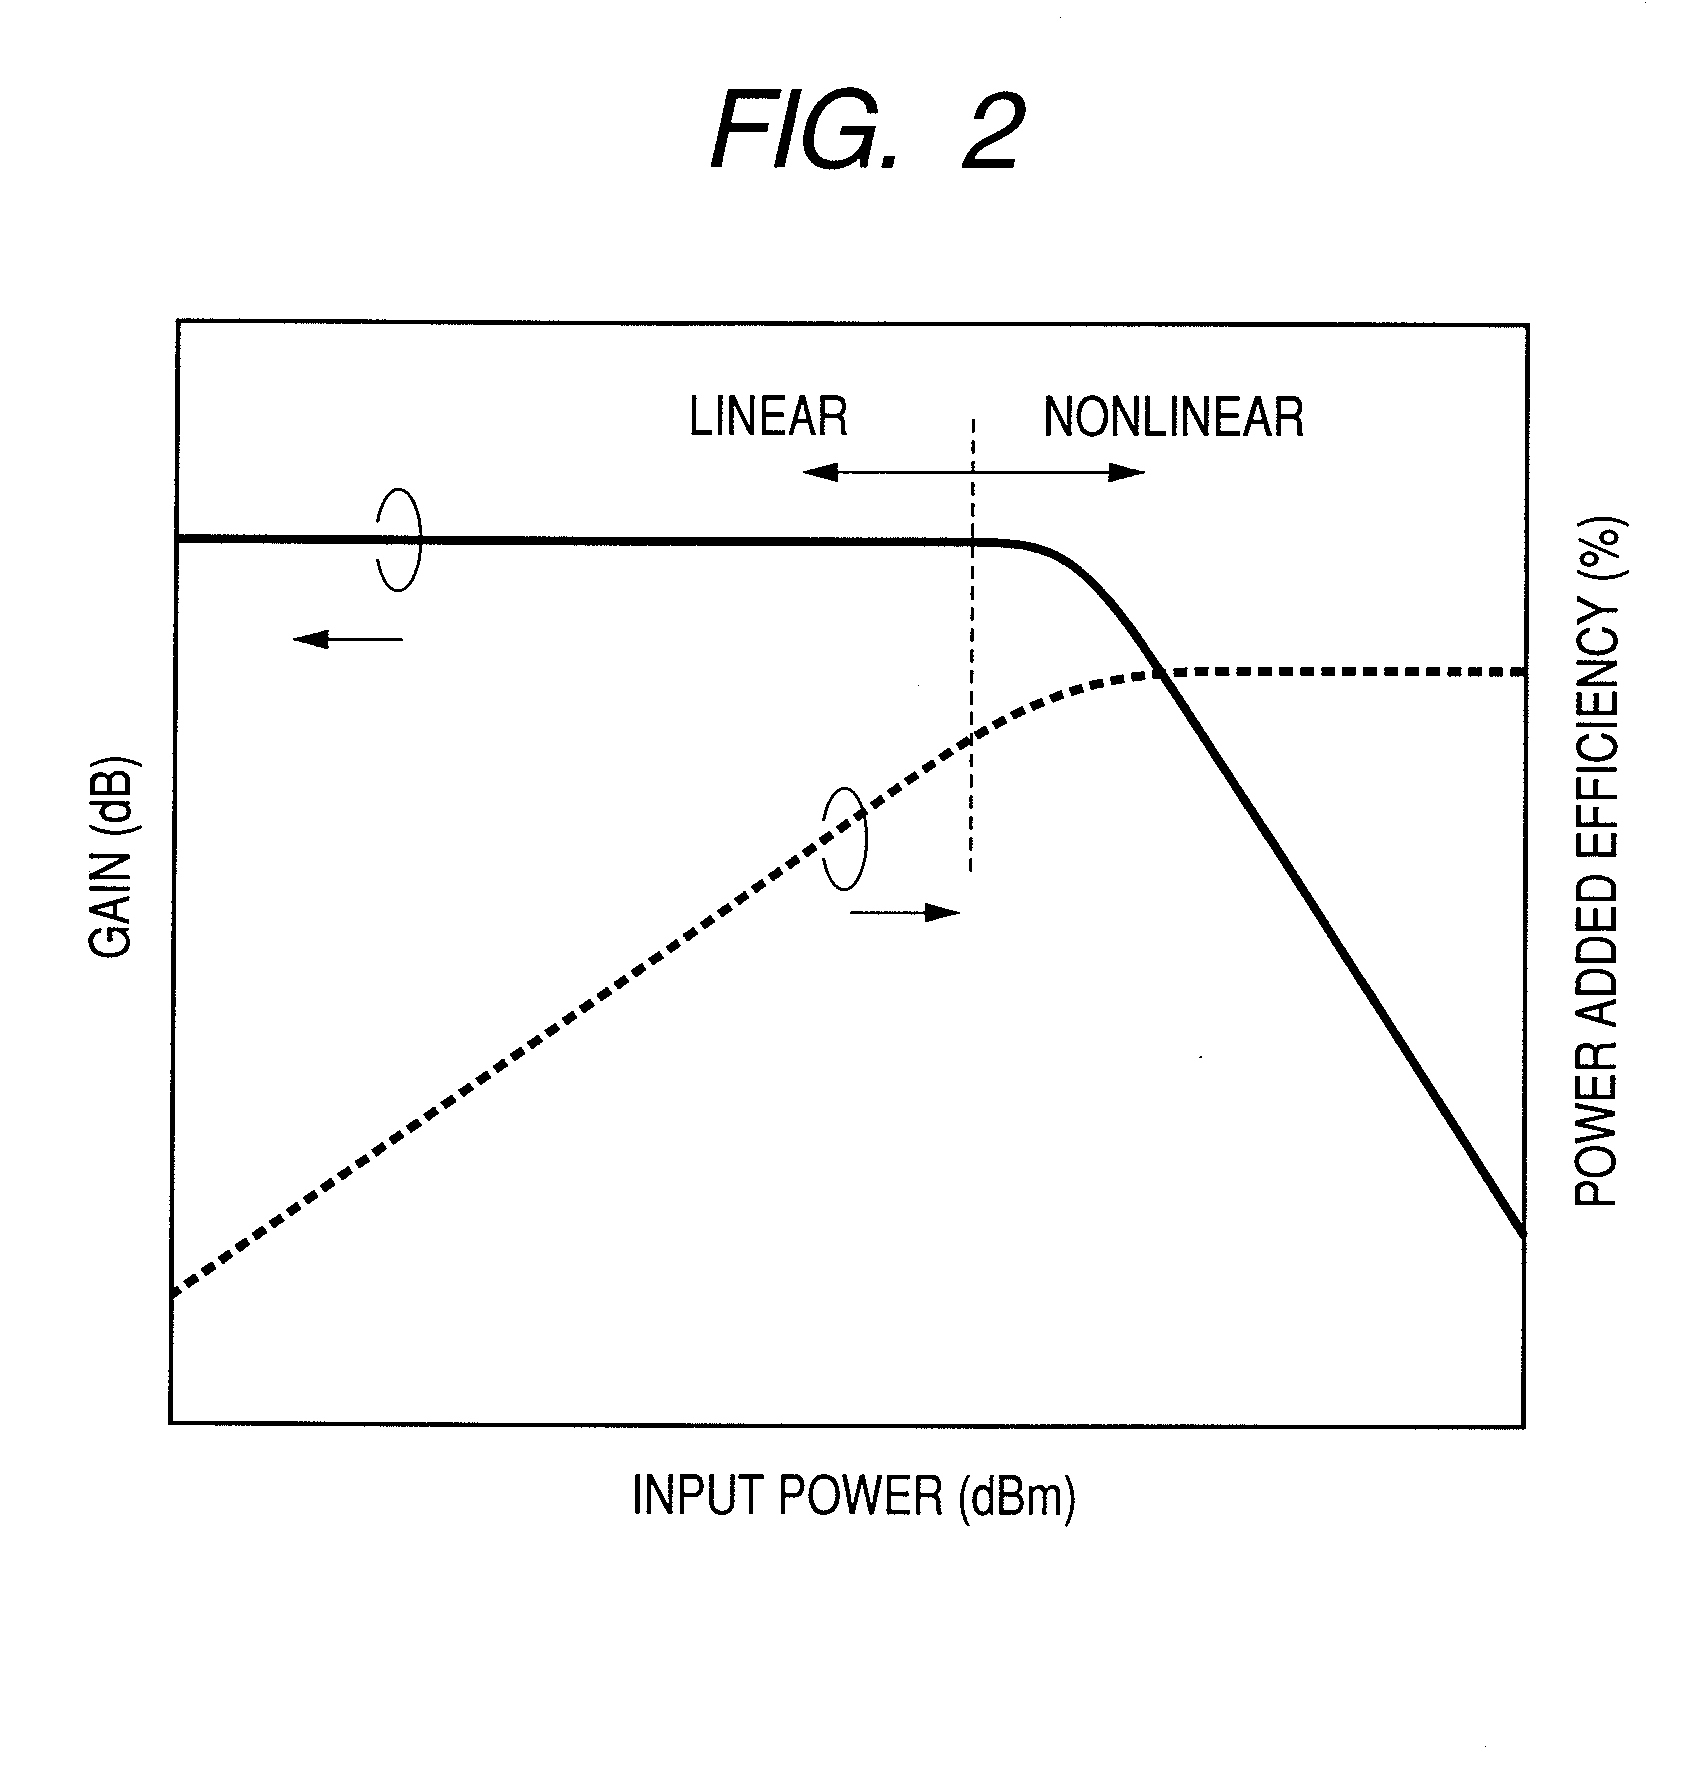 Apparatus and Method for Peak Suppression in Wireless Communication Systems